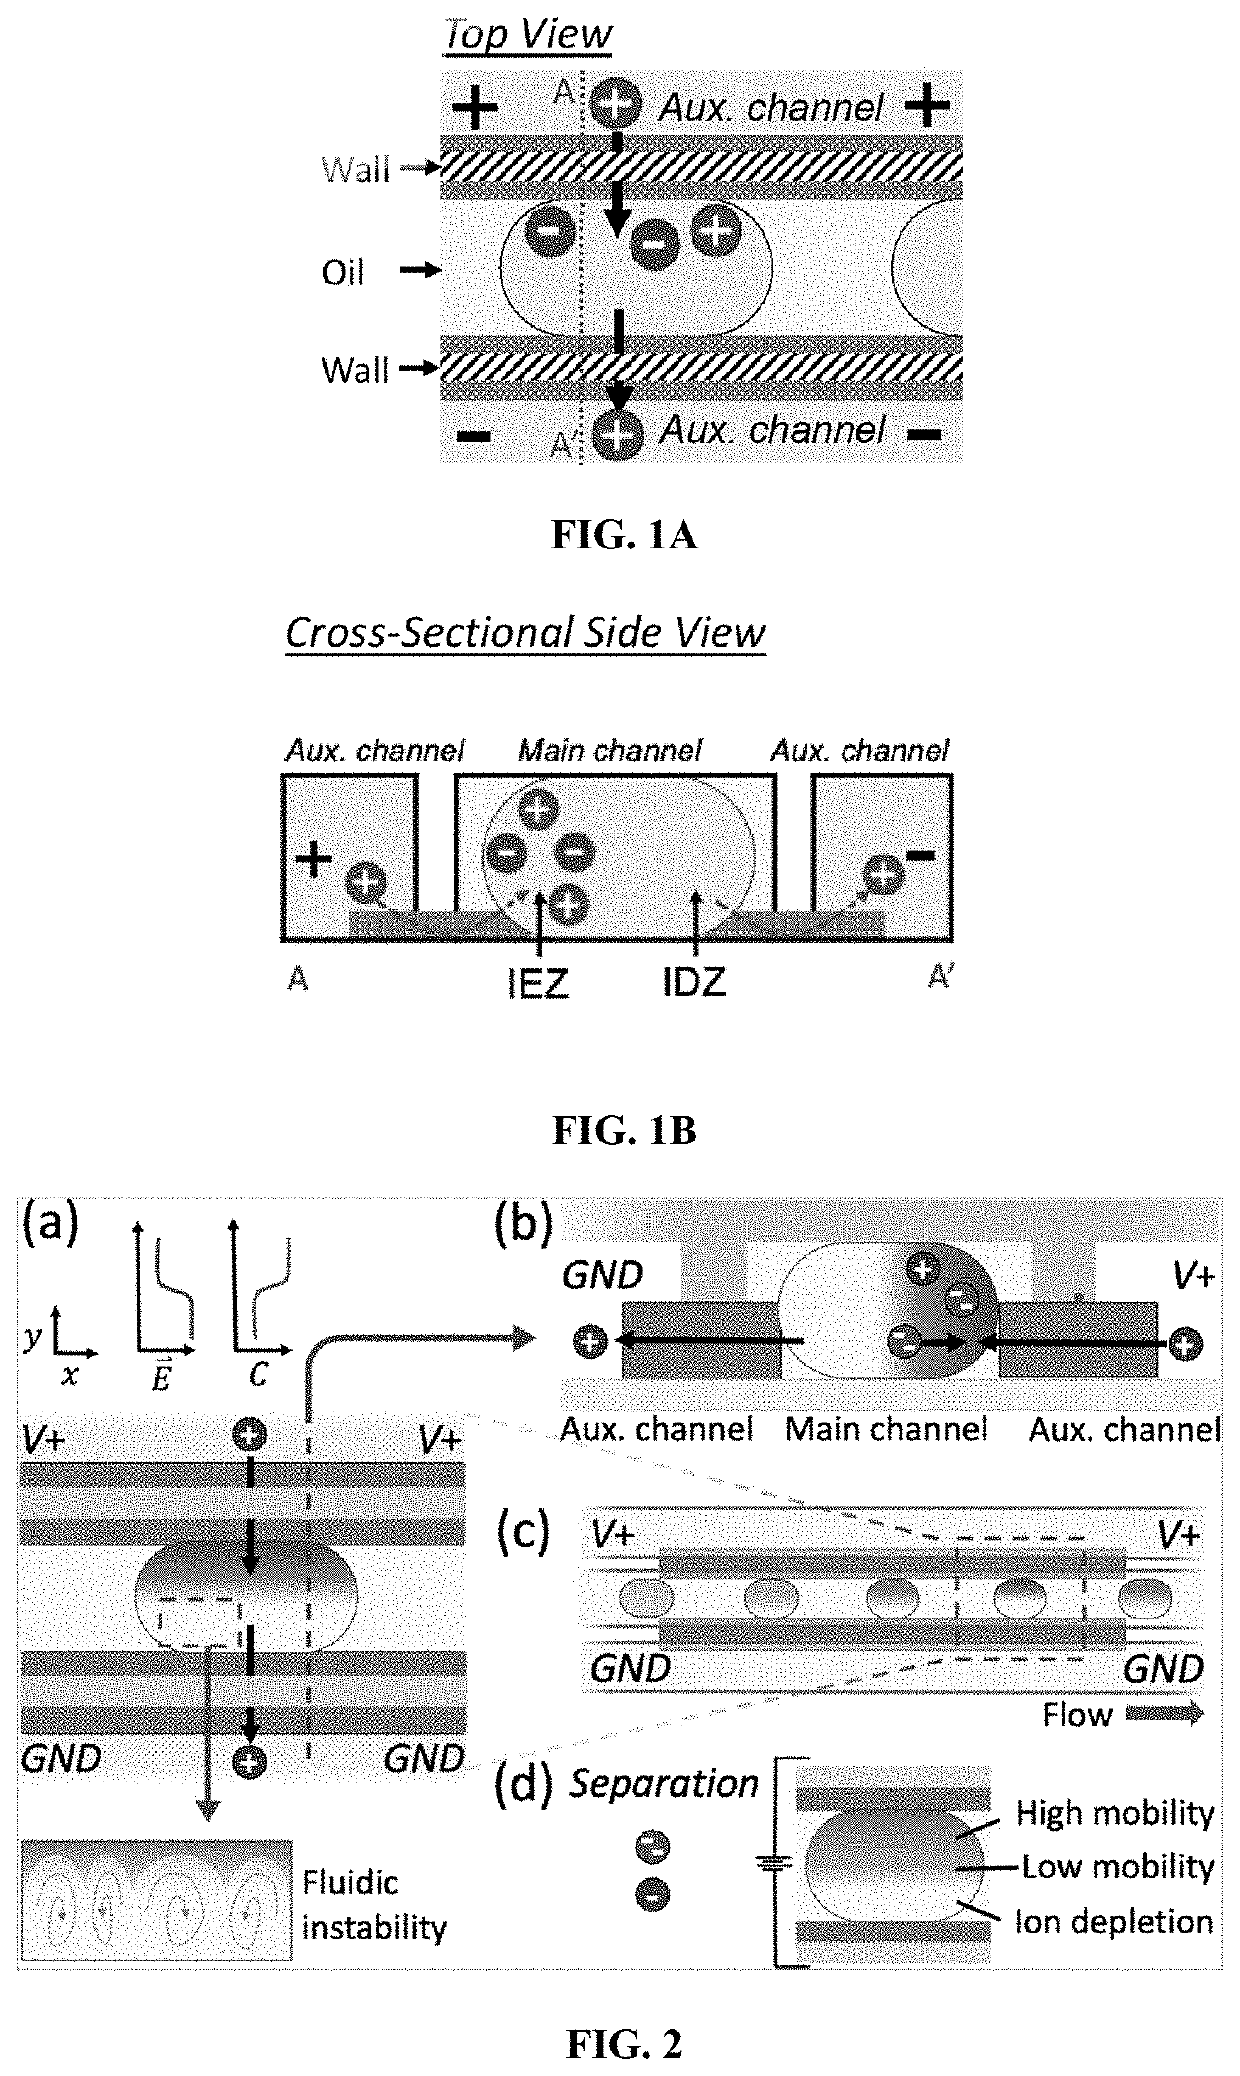 Concentration enrichment, separation and cation exchange in water-in-oil droplets